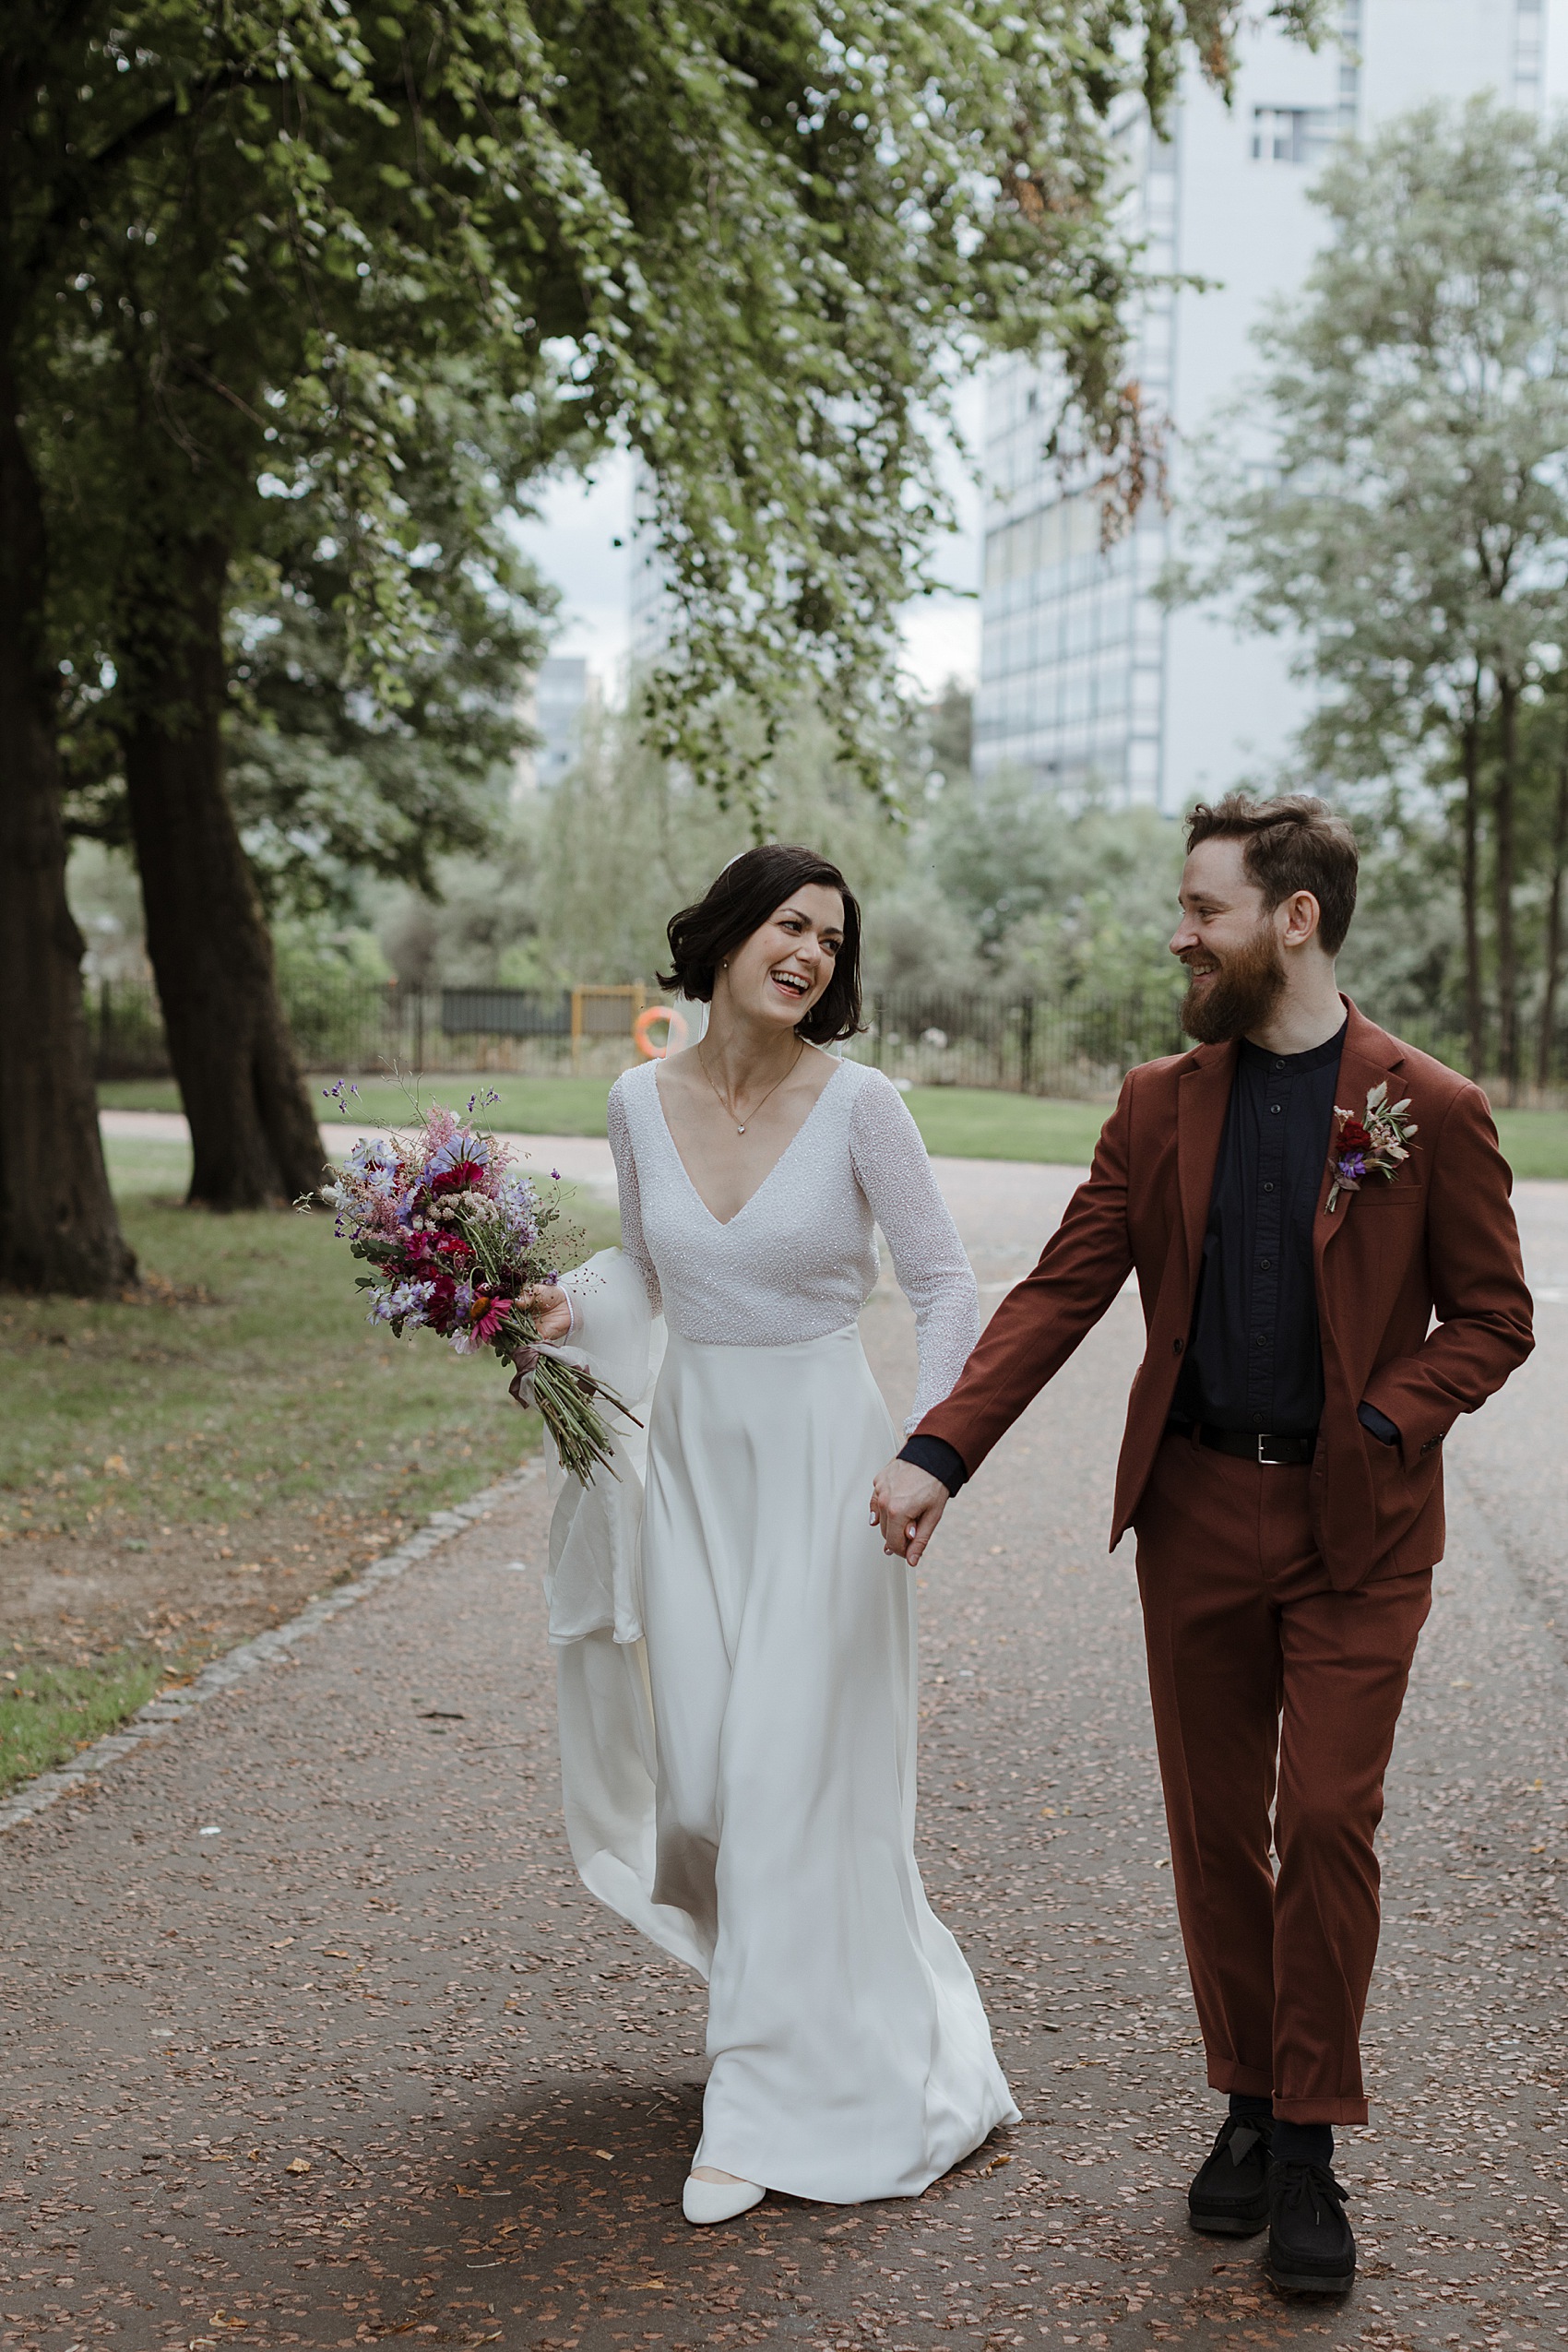 Andrea Hawkes bride Glasgow city wedding  - A Modern, Sequin + Backless Andrea Hawkes Dress for a Stylish Glasgow City Wedding full of Flowers and Joy